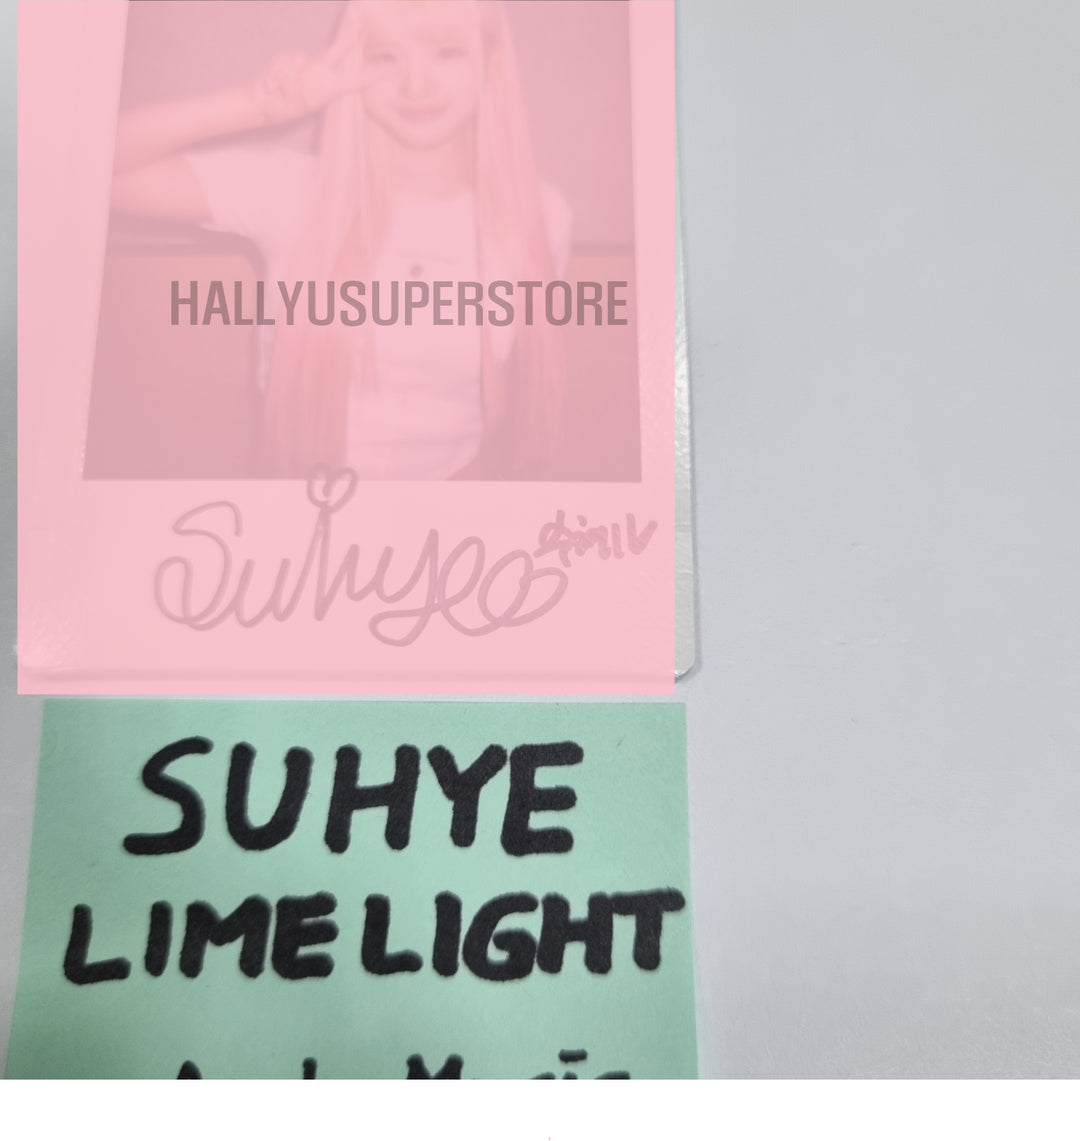 SUHYE (Of LIMELIGHT) "MADELEINE" - Hand Autographed(Signed) Polaroid